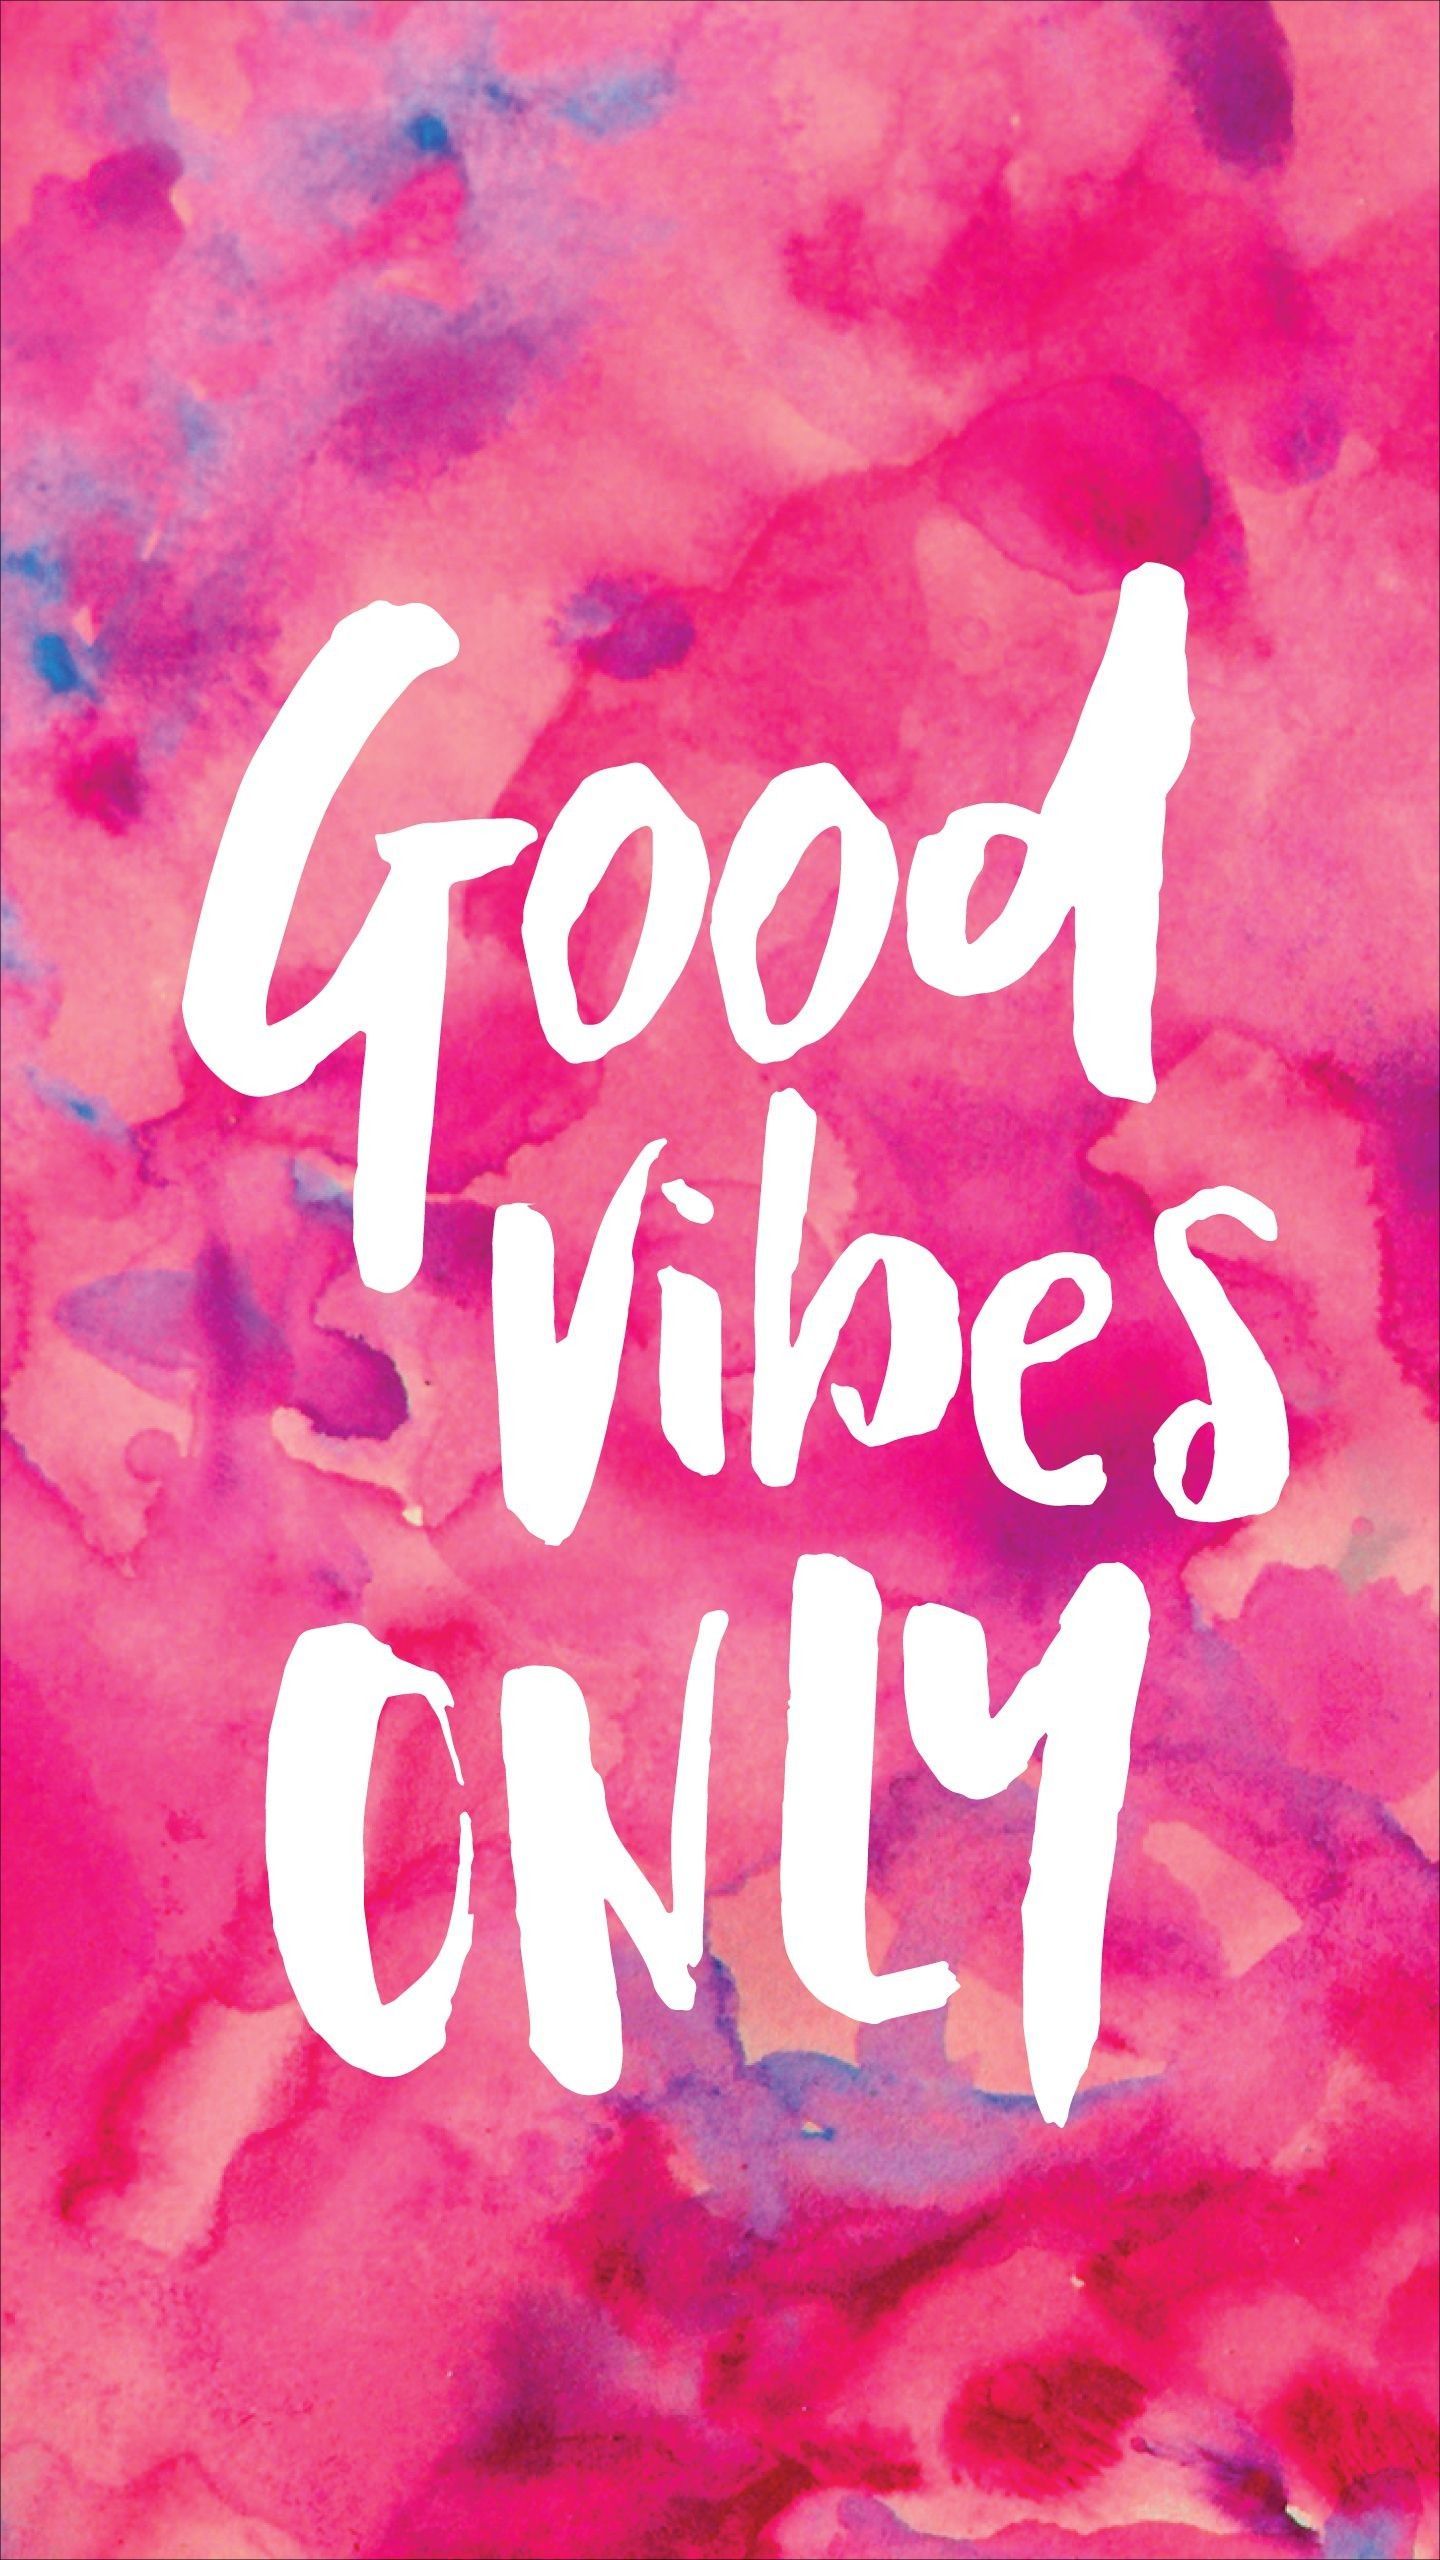 Good Vibes Only Wallpaper Group Picture(42 ). Good vibes wallpaper, Good vibes only, Inspirational quotes wallpaper